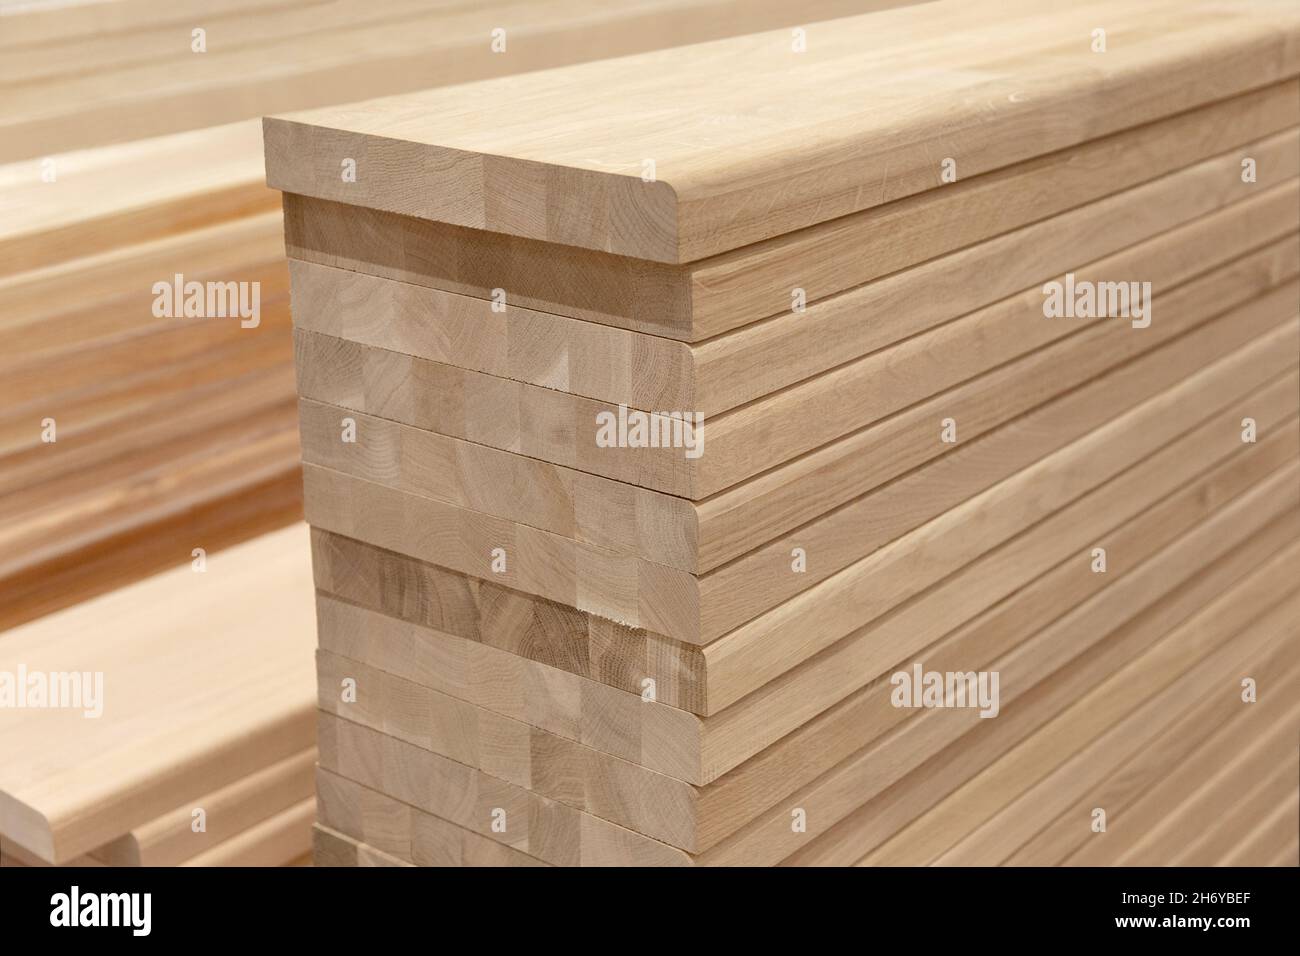 Row of Edge Gluing Boards, Stacks of strong wood planks in a store or on a building site. Natural rough wooden boards boards, lumber, industrial wood Stock Photo